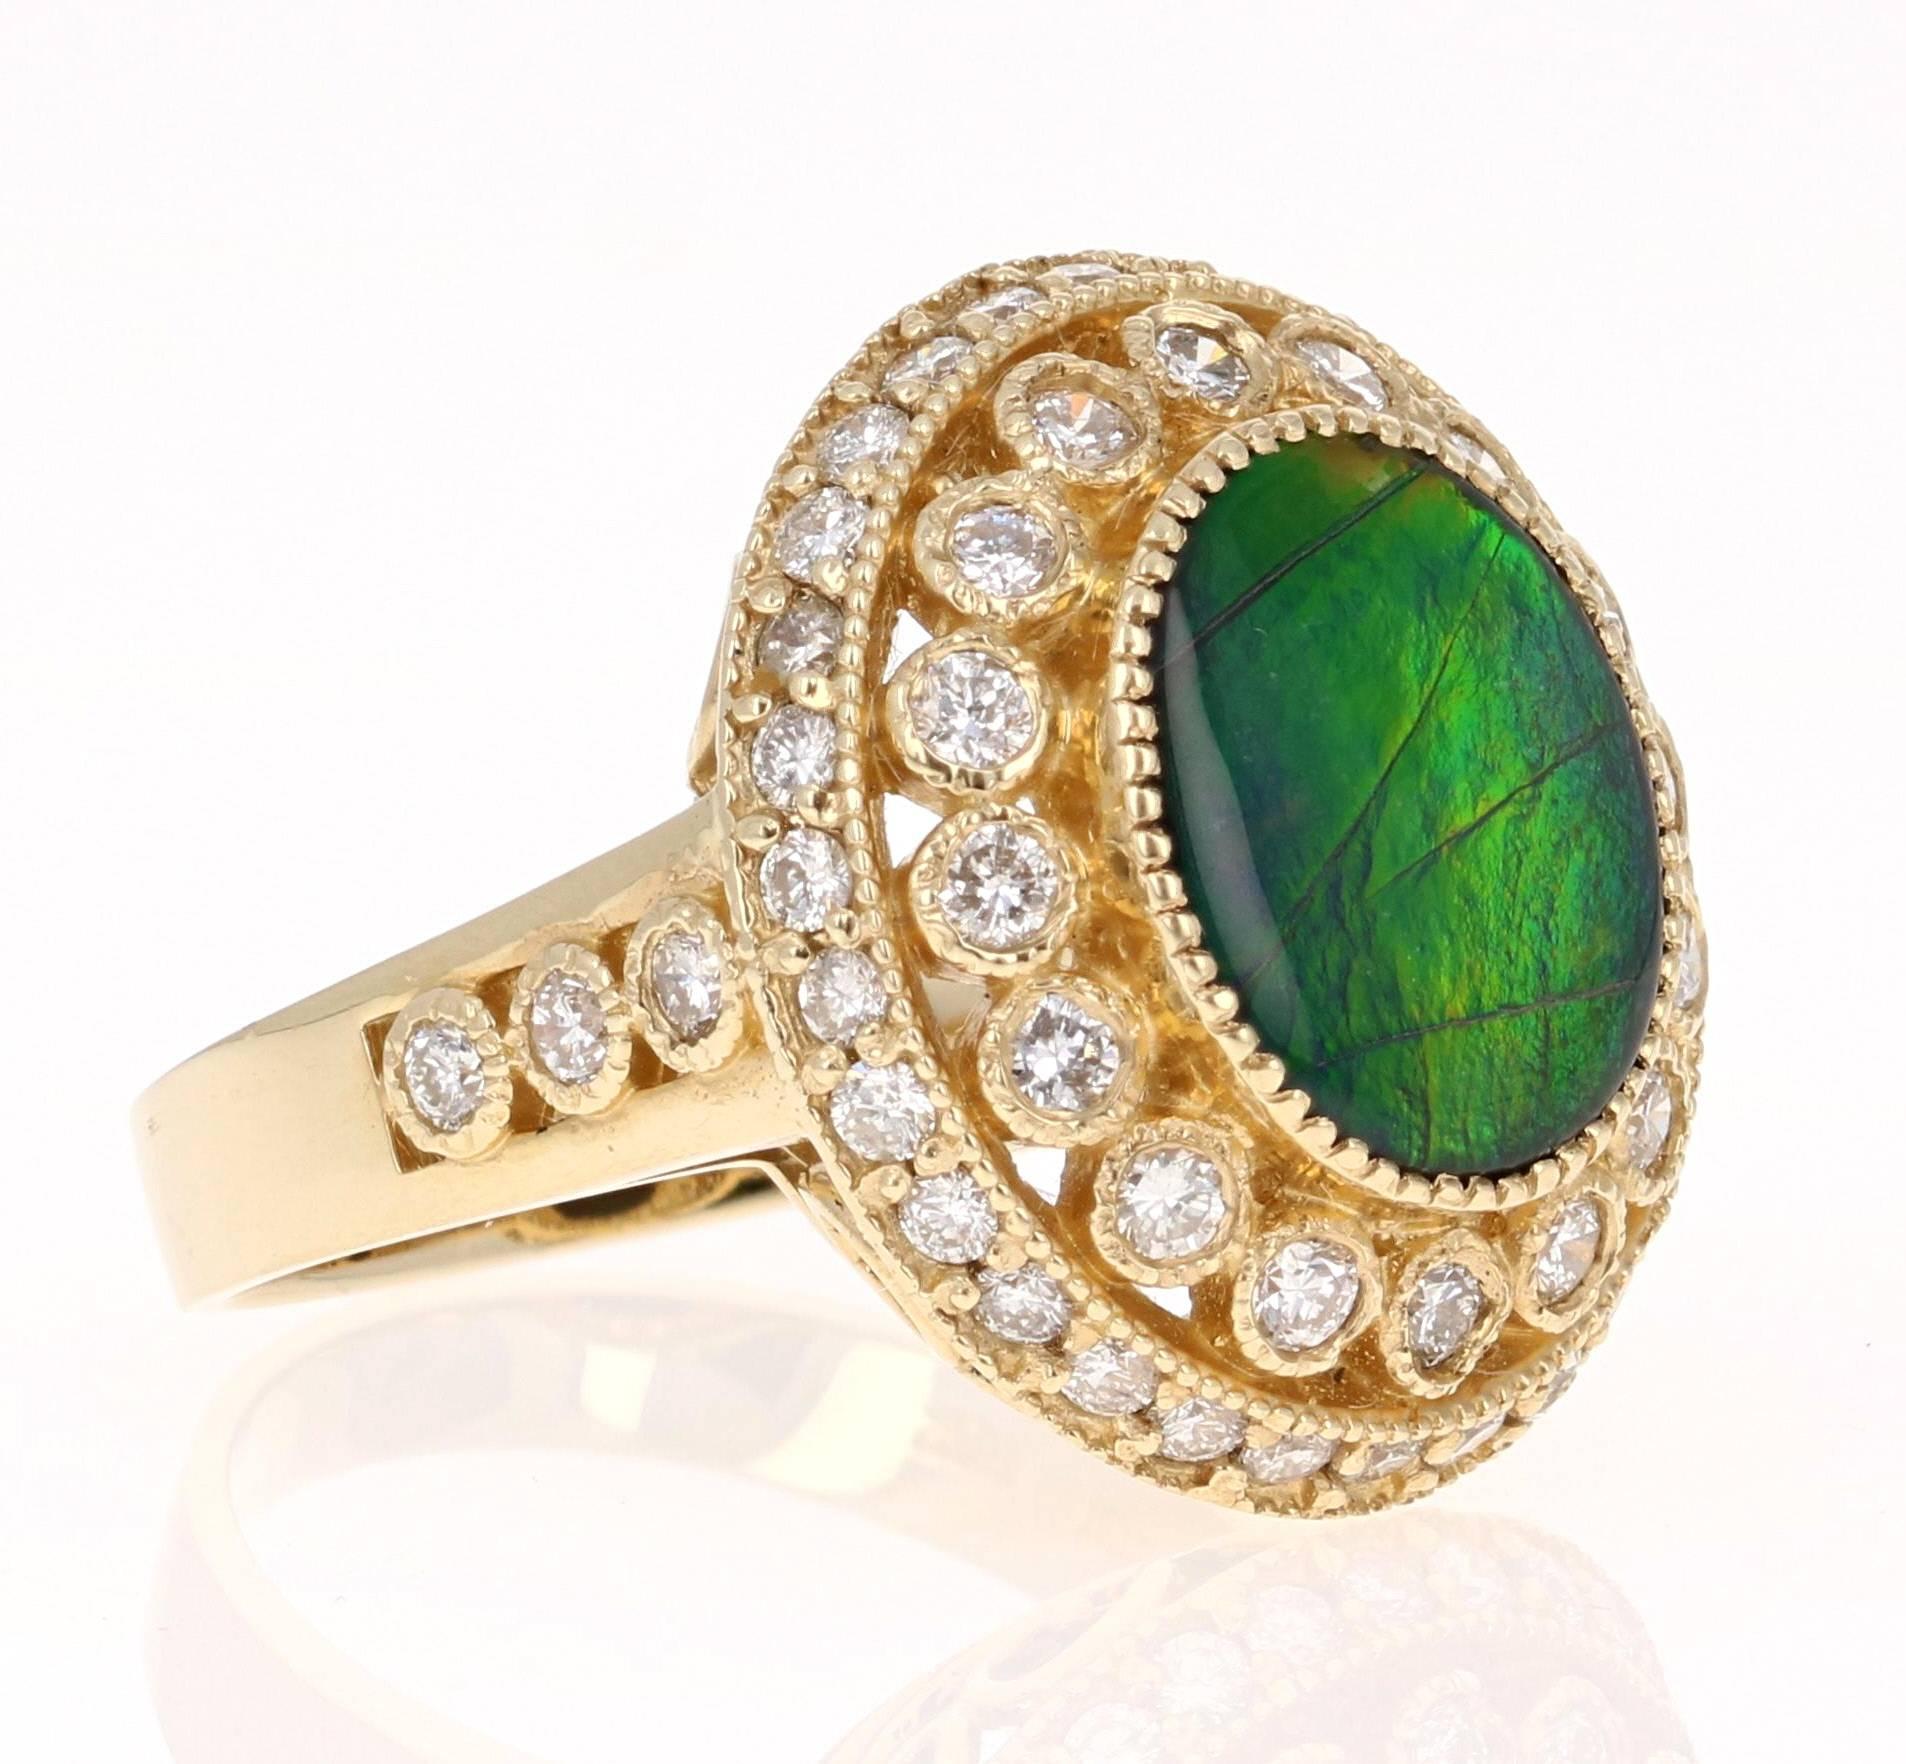 This elegant and royal ring has a beautiful 3.10 carat Oval Cut Ammolite in the center of the ring. Ammolite is an Opal-like organic gemstone that is primarily found in the eastern slopes of the North American Rocky Mountains. This particular